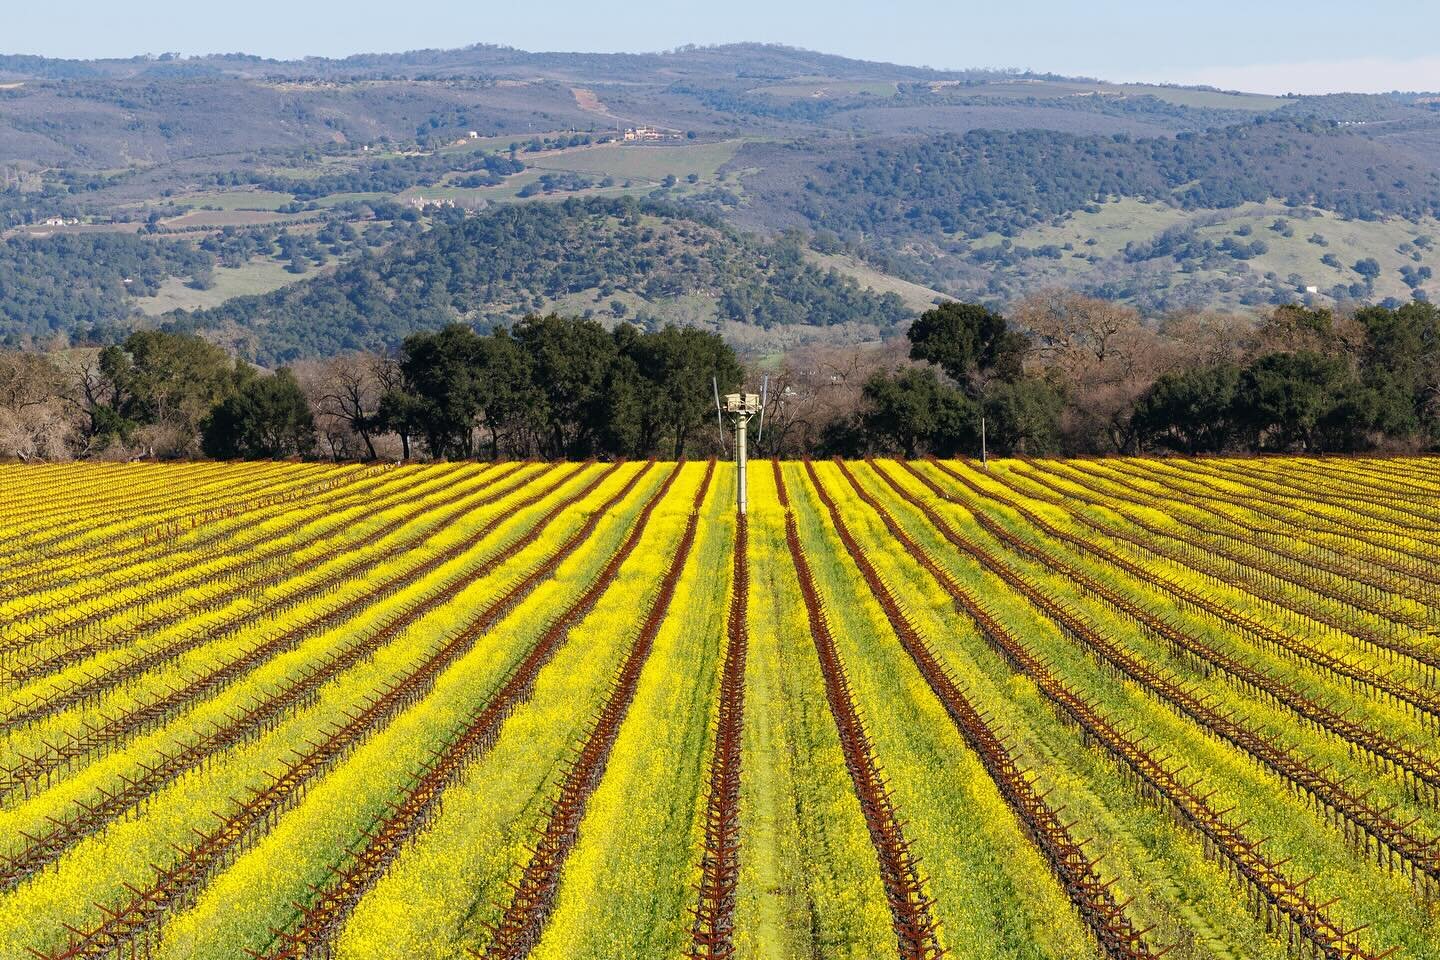 Sea of mustard 🌼🍇
#napavalley #yountville #oakville 

Taken at the incredible MorgaenLee and Lincoln Creek vineyards @yount_mill_vineyards 

#yountvilledreaming #mustardfield #vineyard #winecountry #mustardyellow #napa #napawine #napaphotographer #